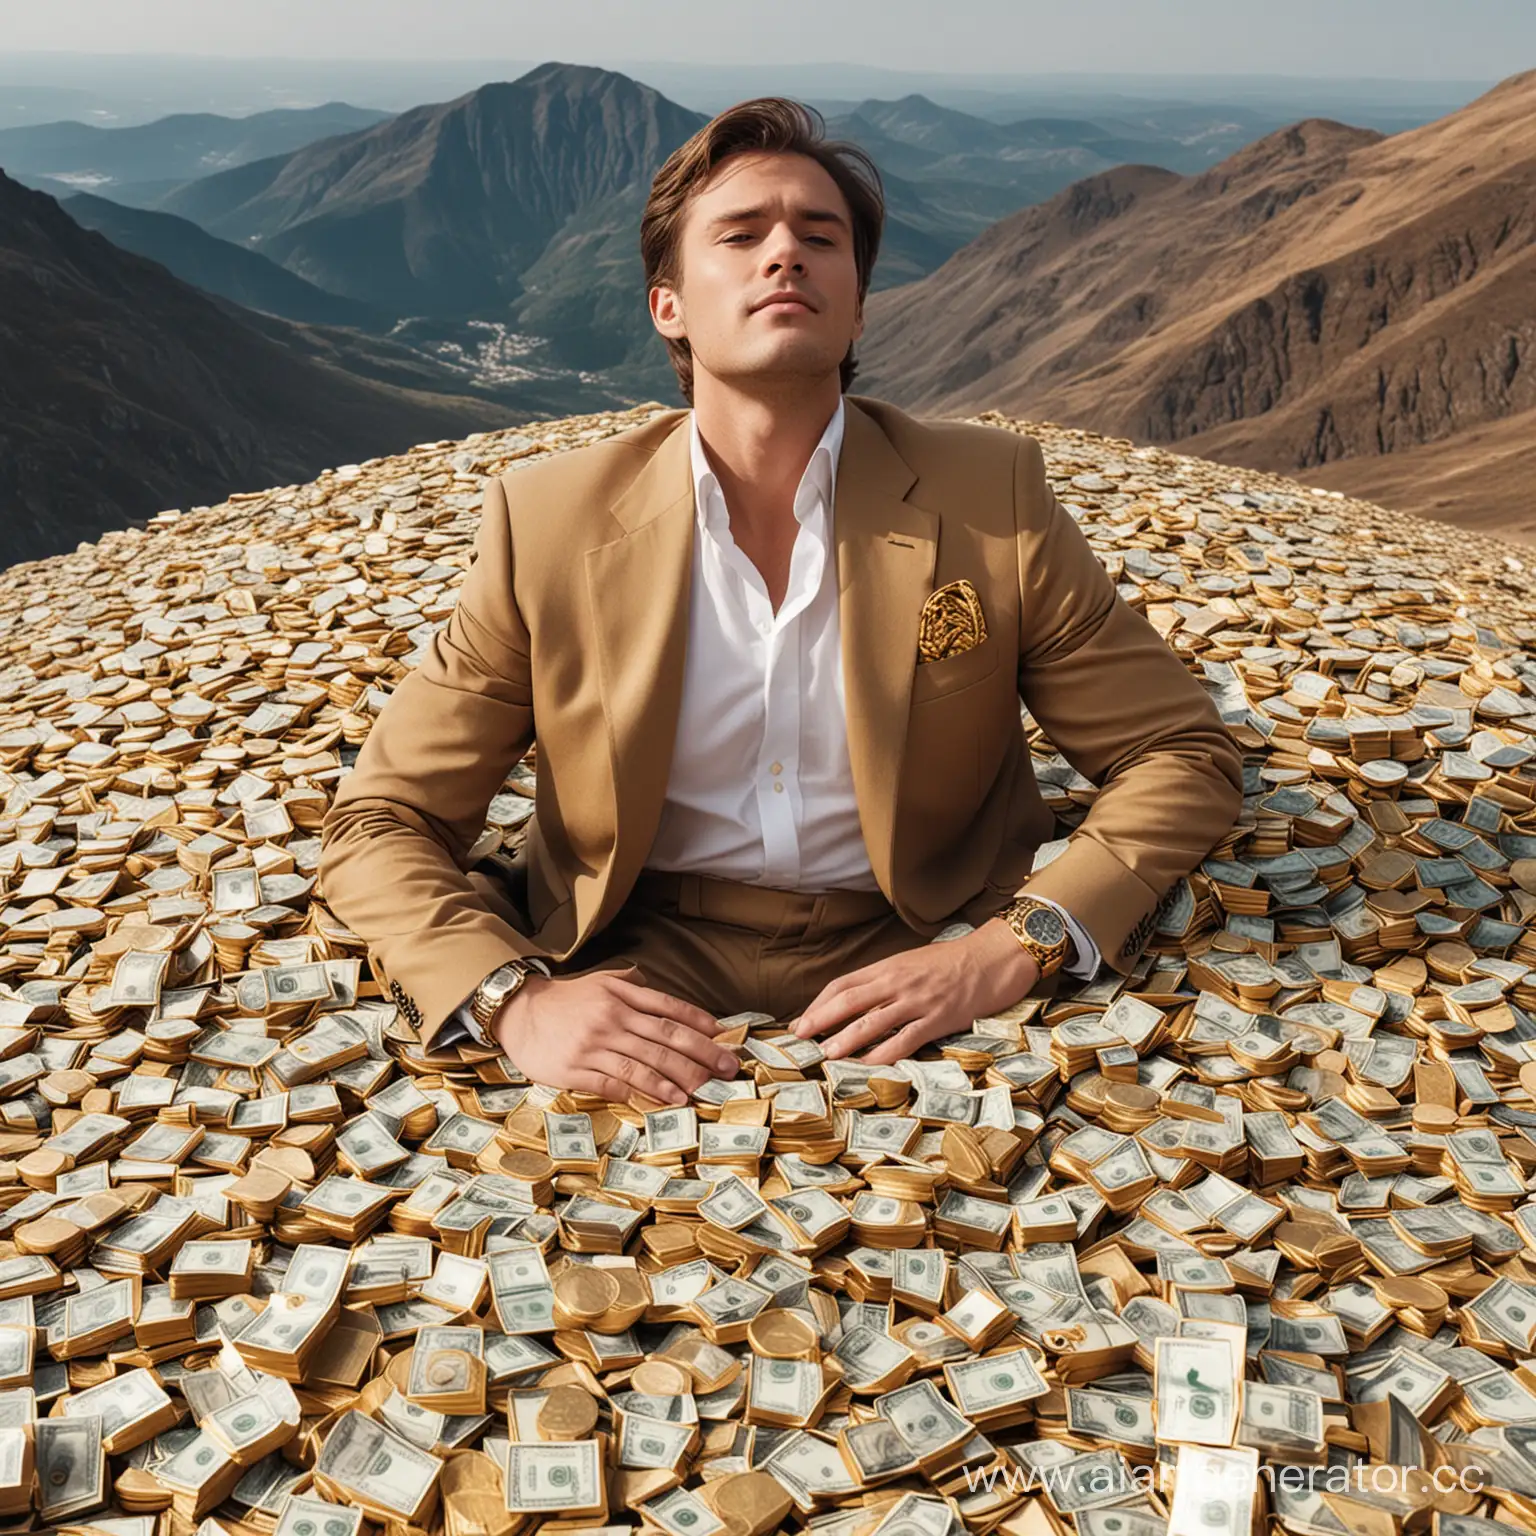 Mellstroy-Lounging-on-a-Mountain-of-Wealth-with-Golden-Watches